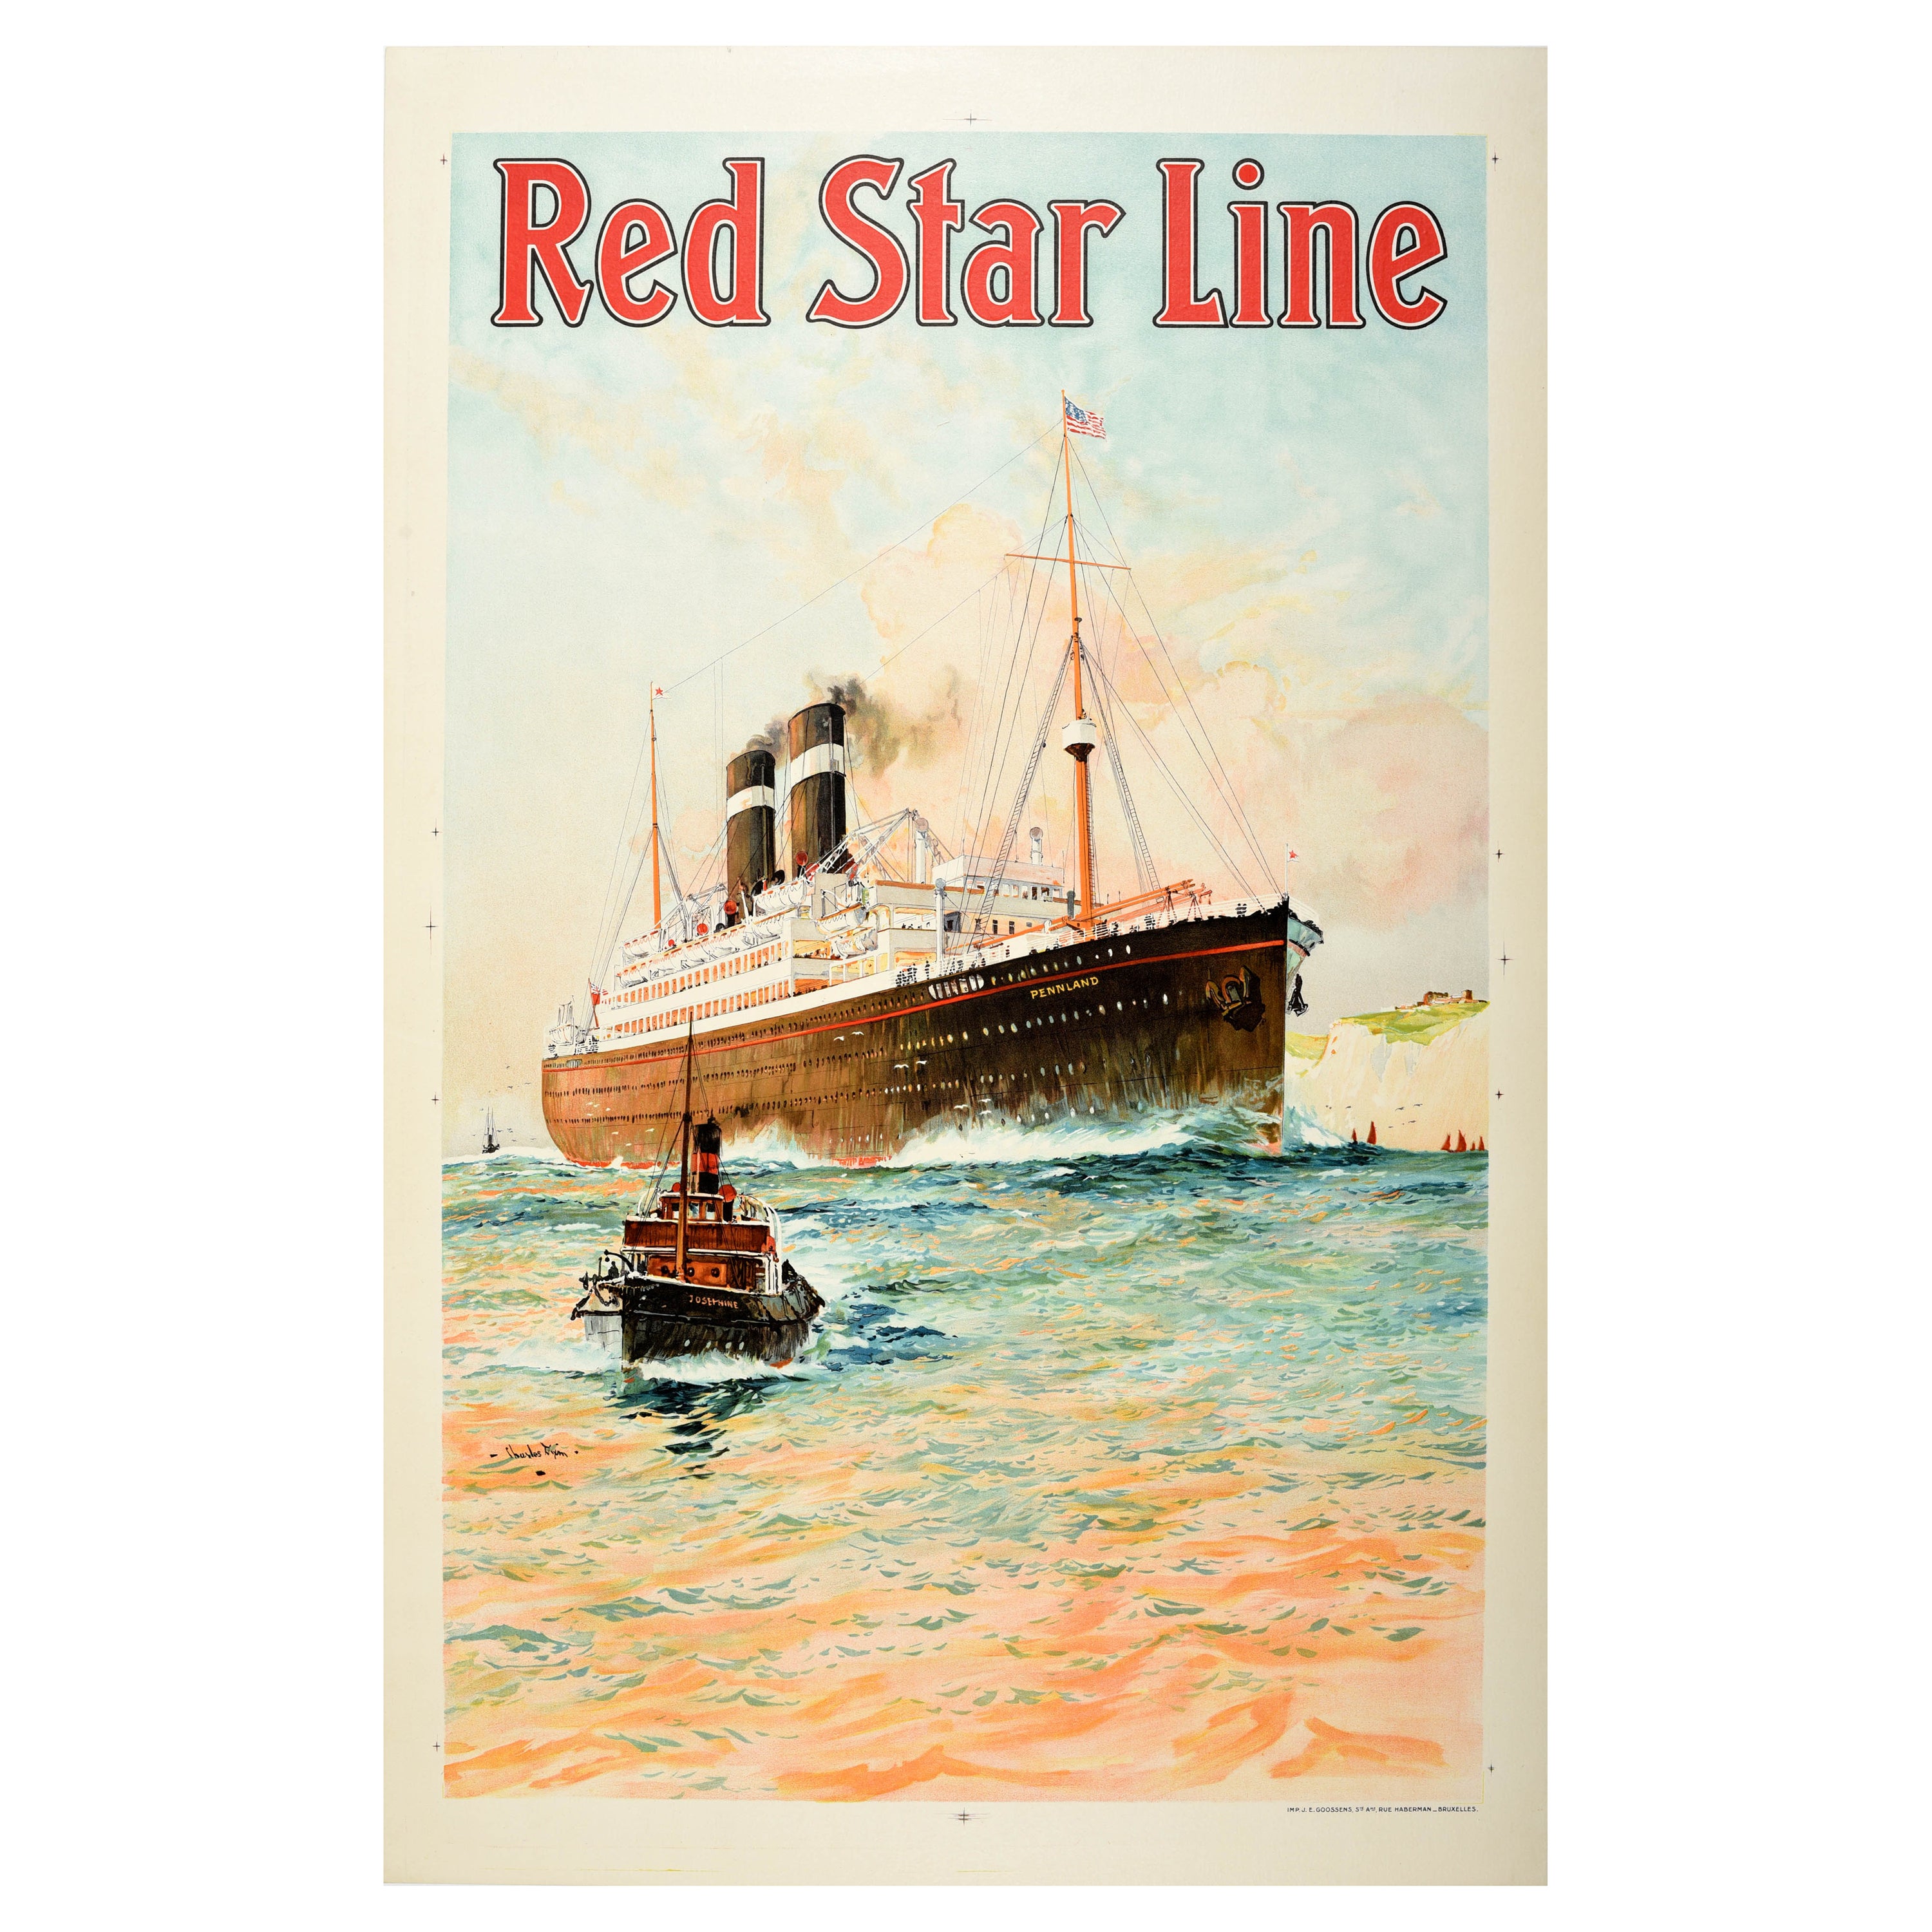 TX355 Vintage Bombay India American Cruise Ship Line Travel Poster A2/A3/A4 